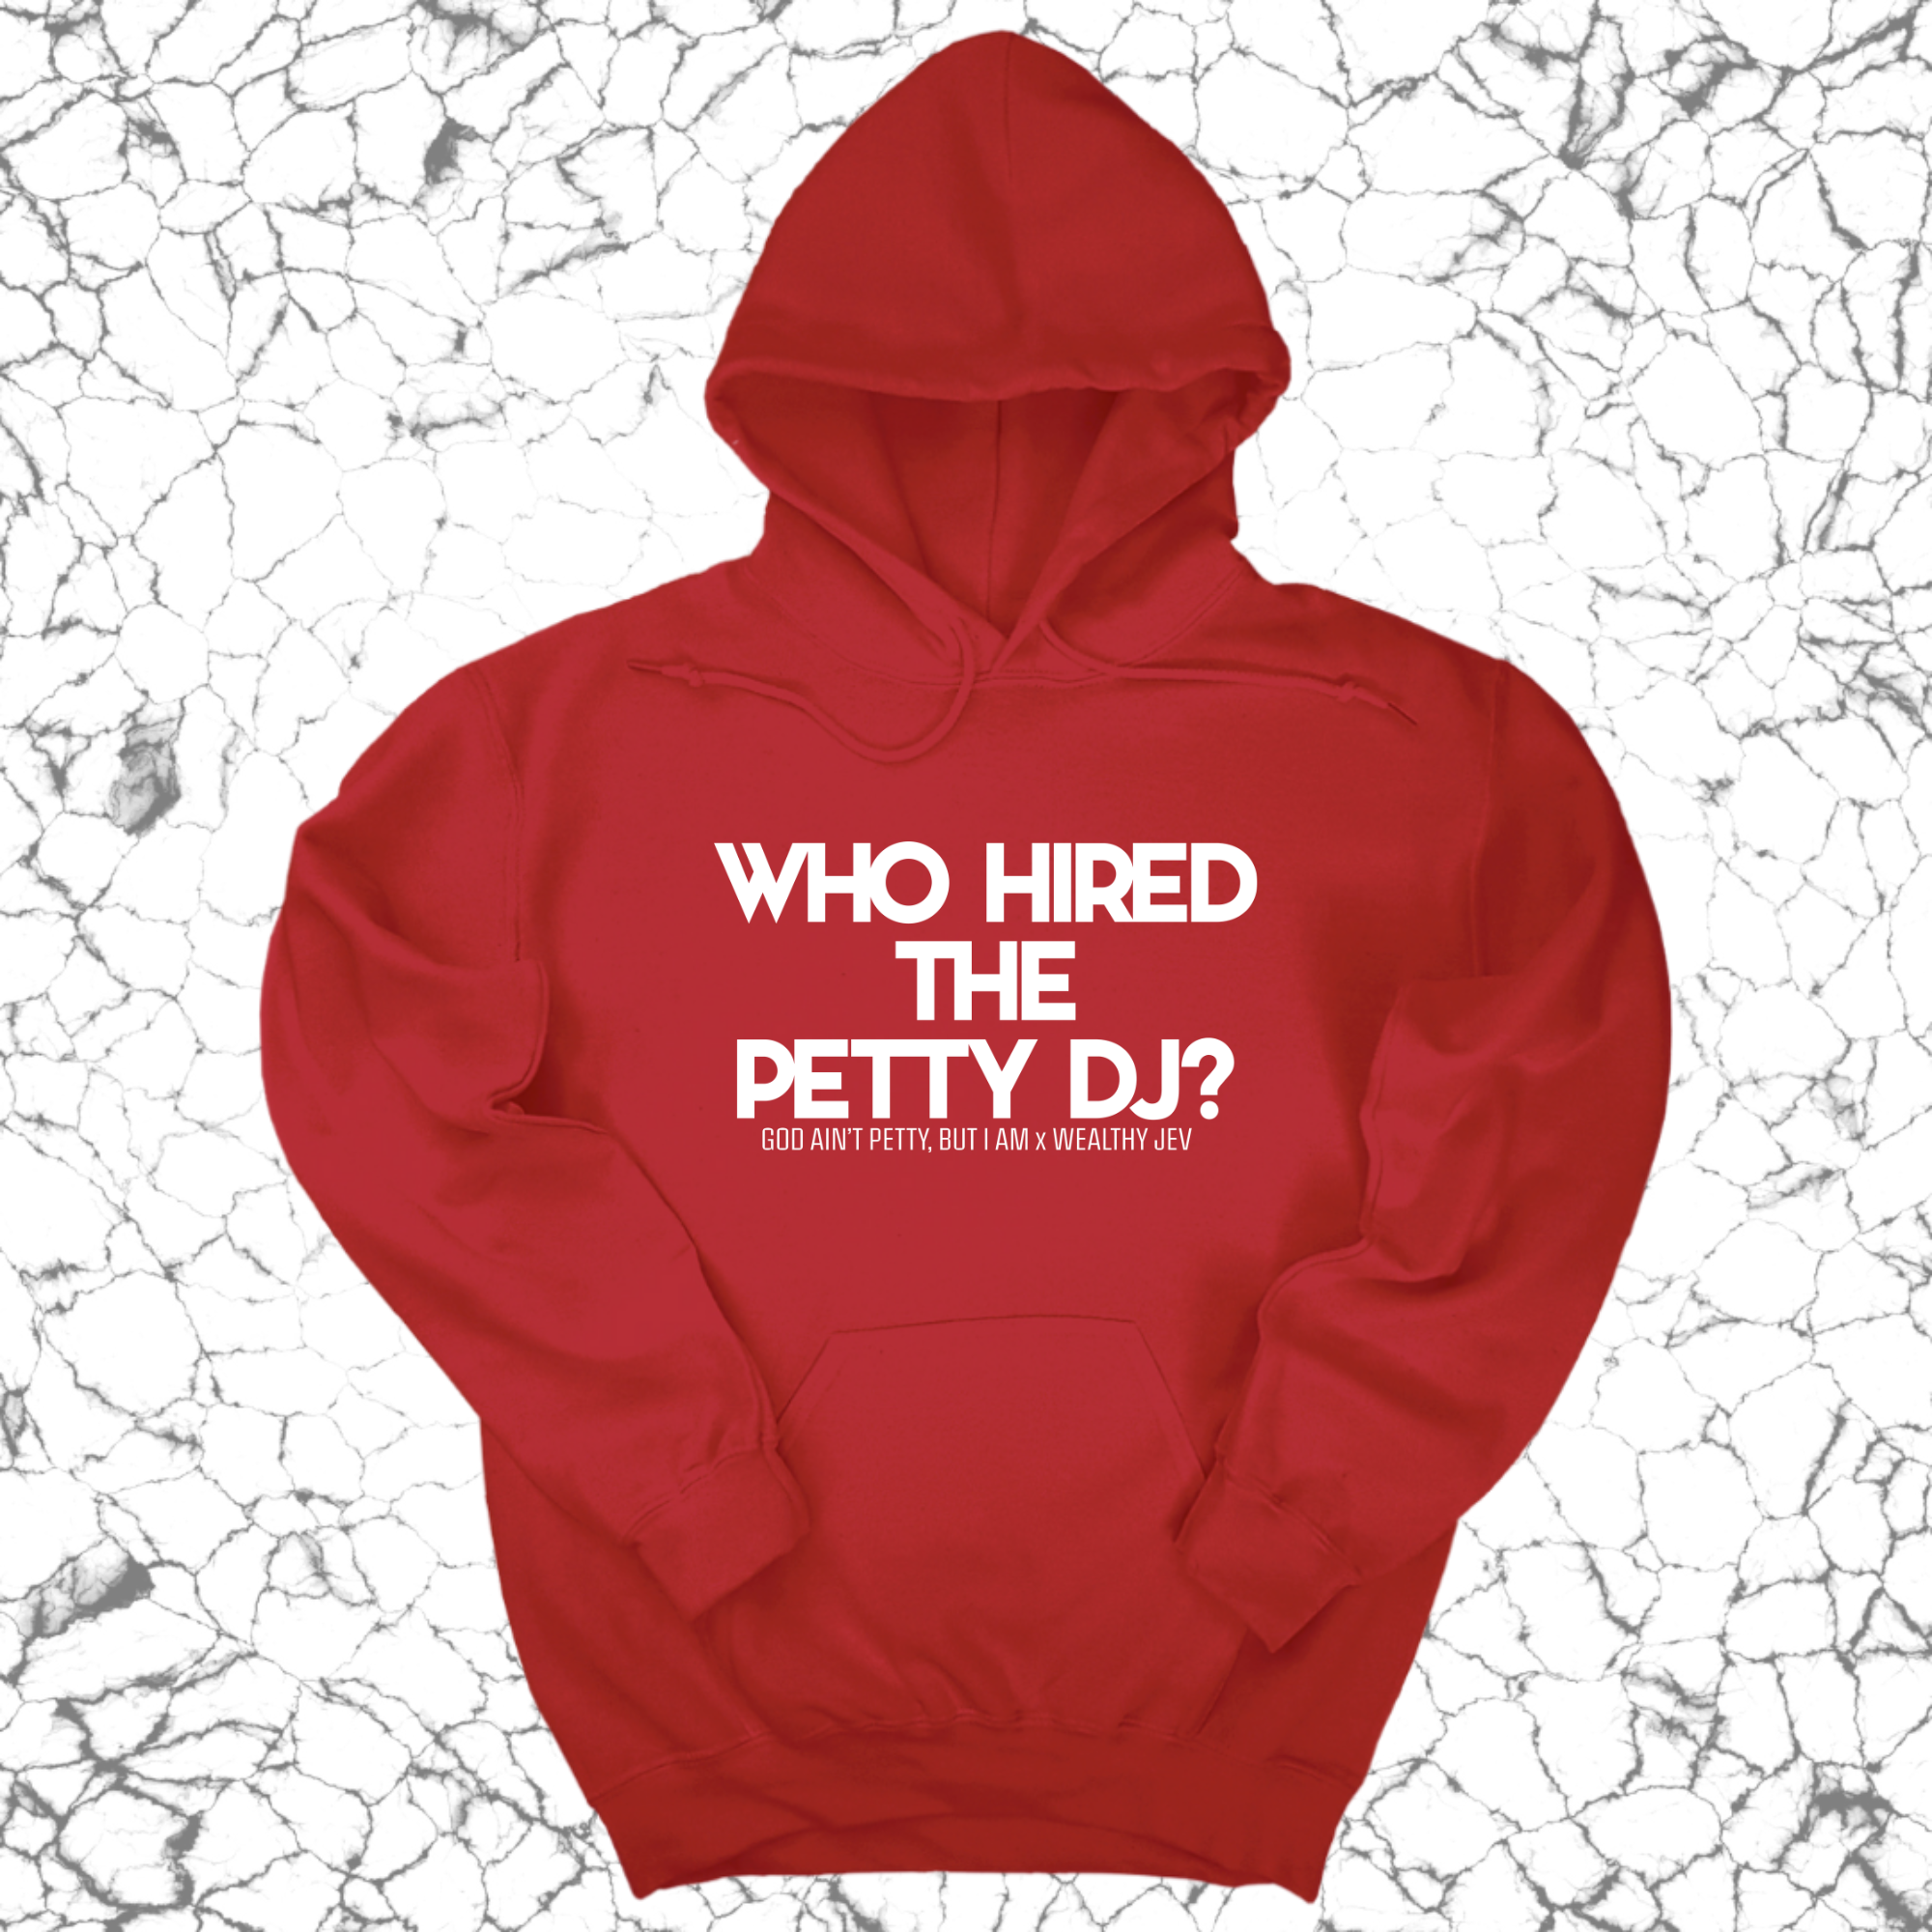 Who hired the petty DJ? Unisex Hoodie (God Ain't Petty, but I Am x Wealthy Jev Collab)-Hoodie-The Original God Ain't Petty But I Am